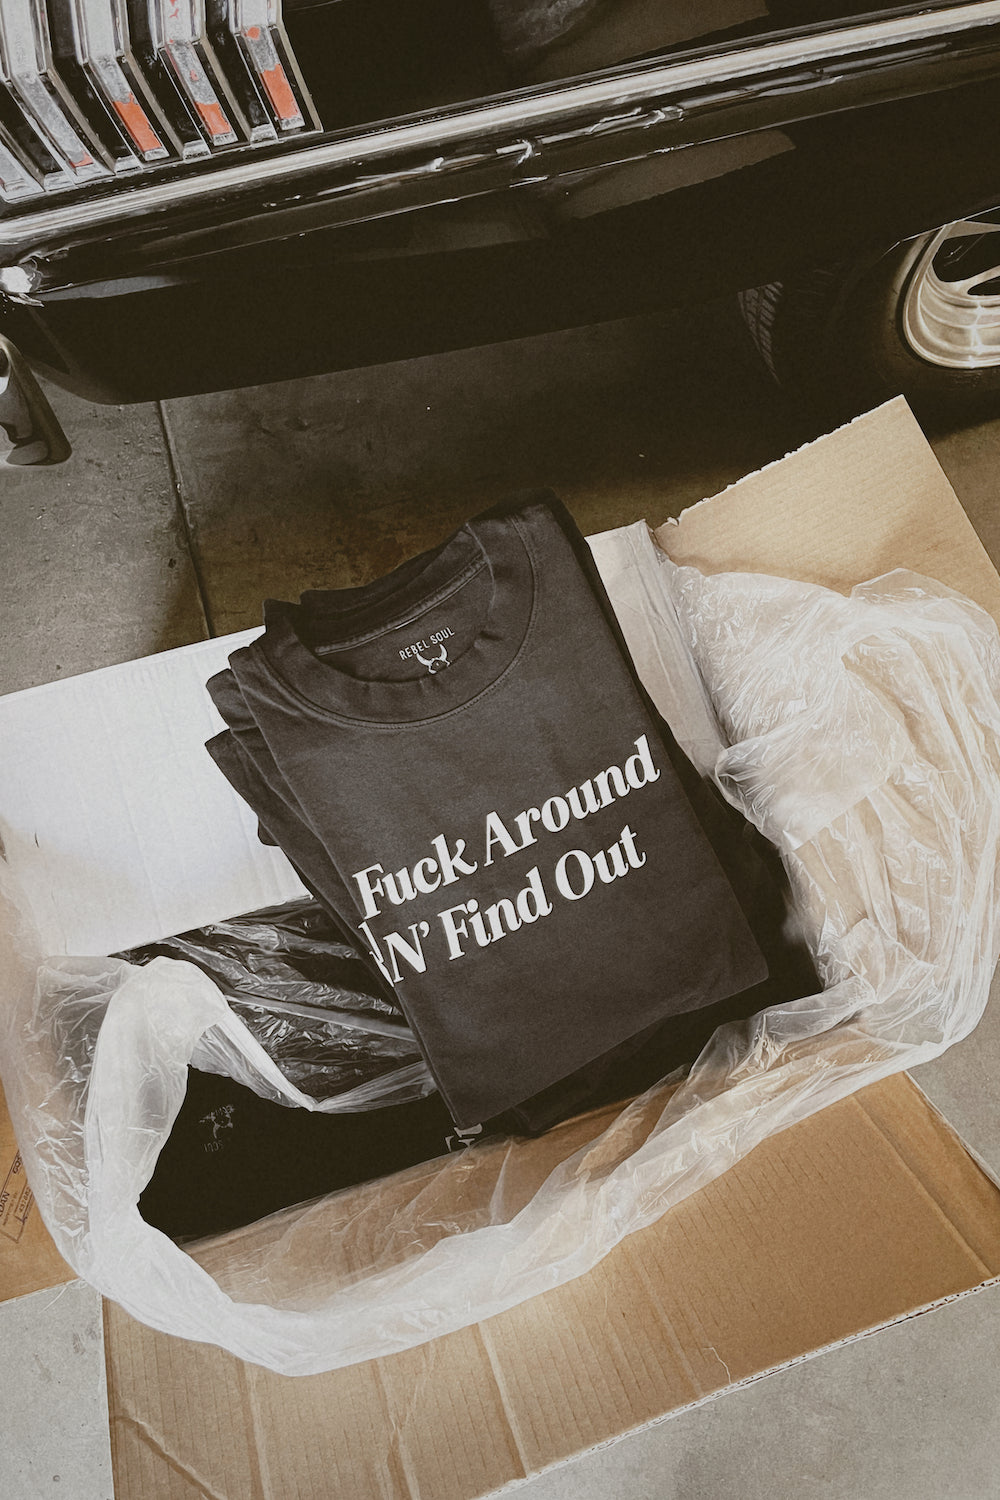 Fuck Around and Find Out T-Shirt – Fuckaroundshop